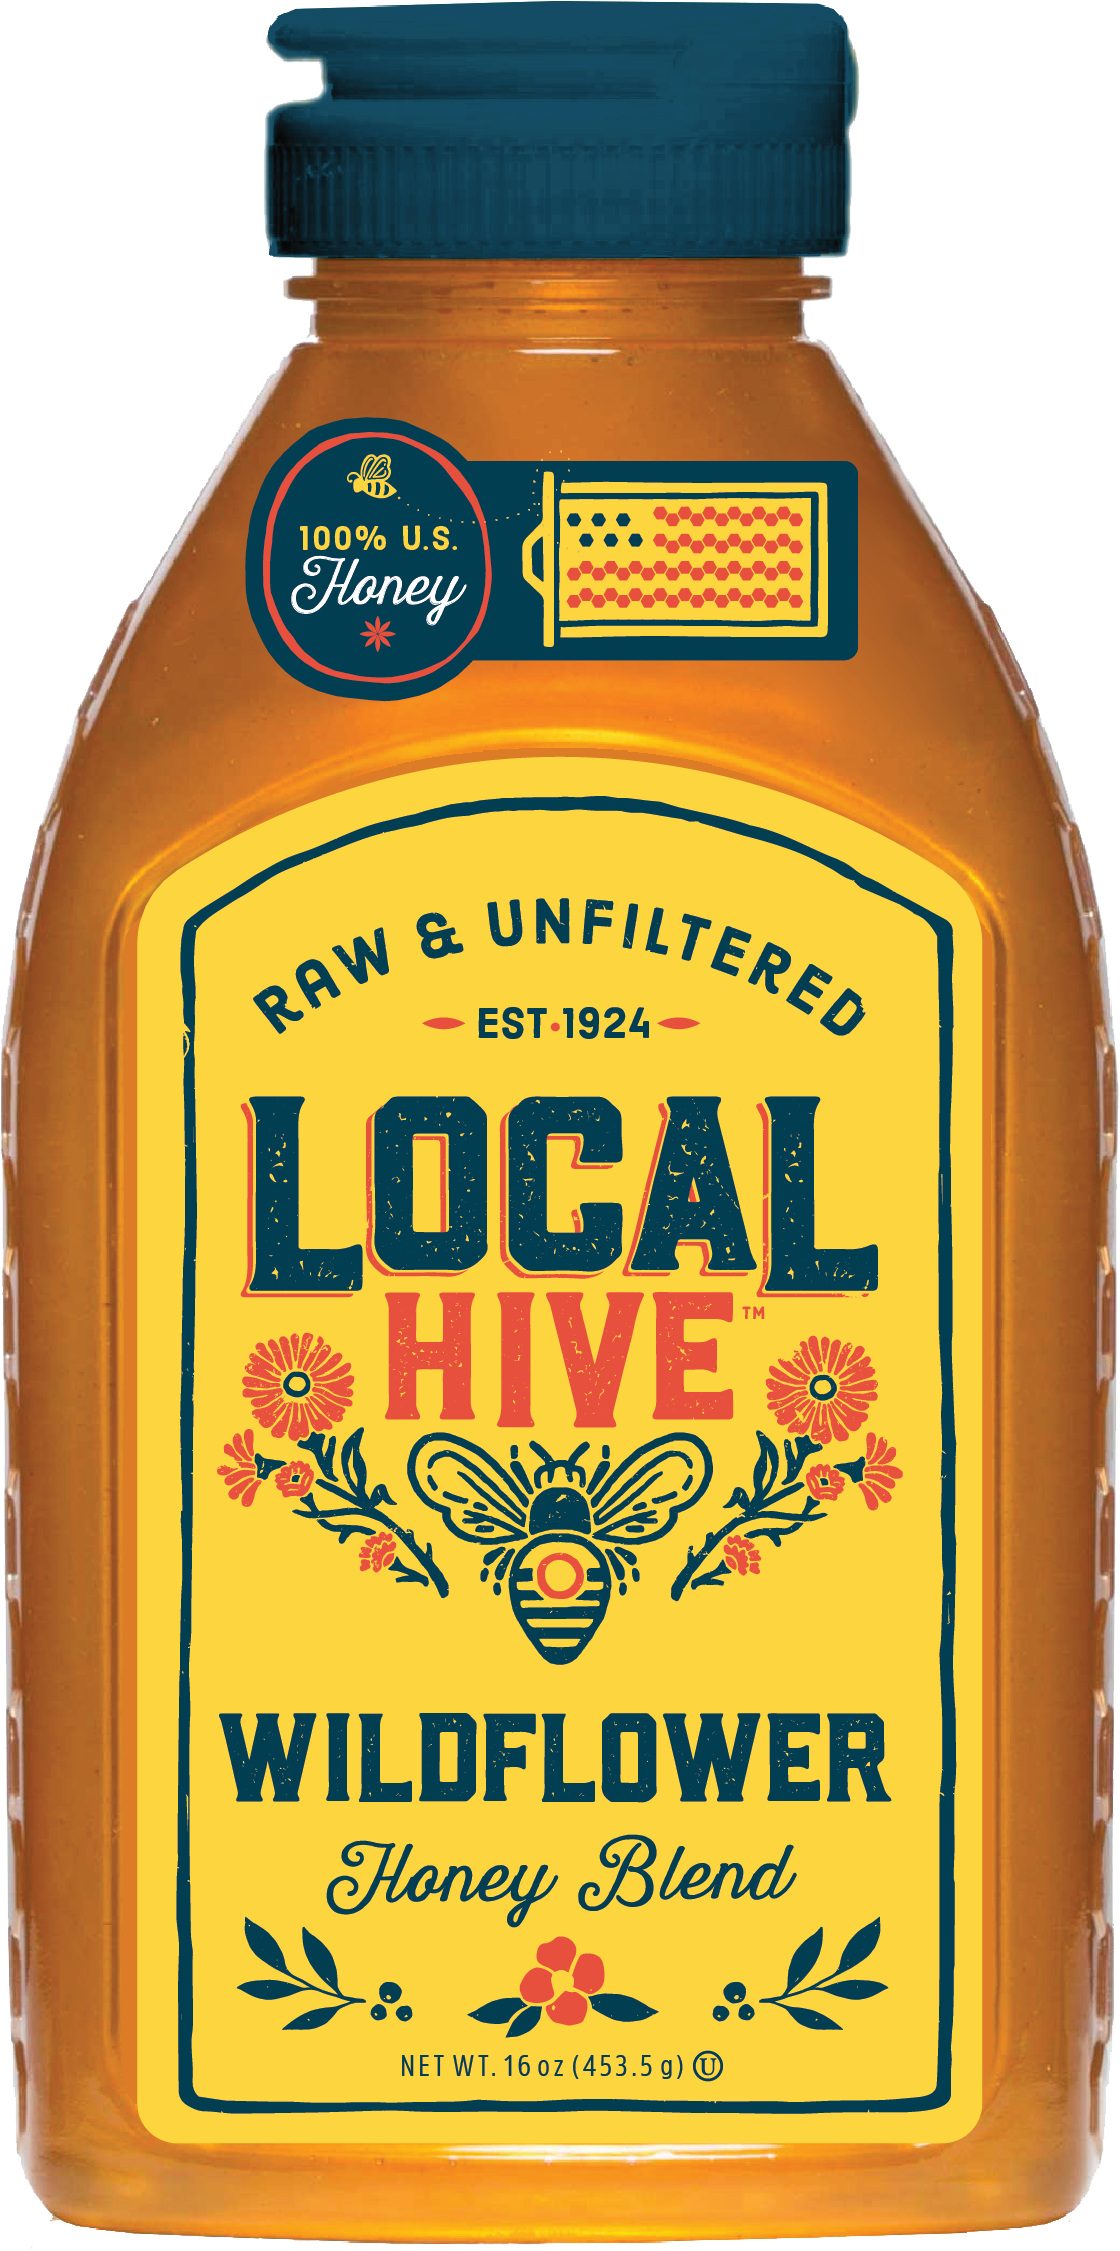 Local Hive, Raw & Unfiltered, Wildflower Honey Blend, 16oz